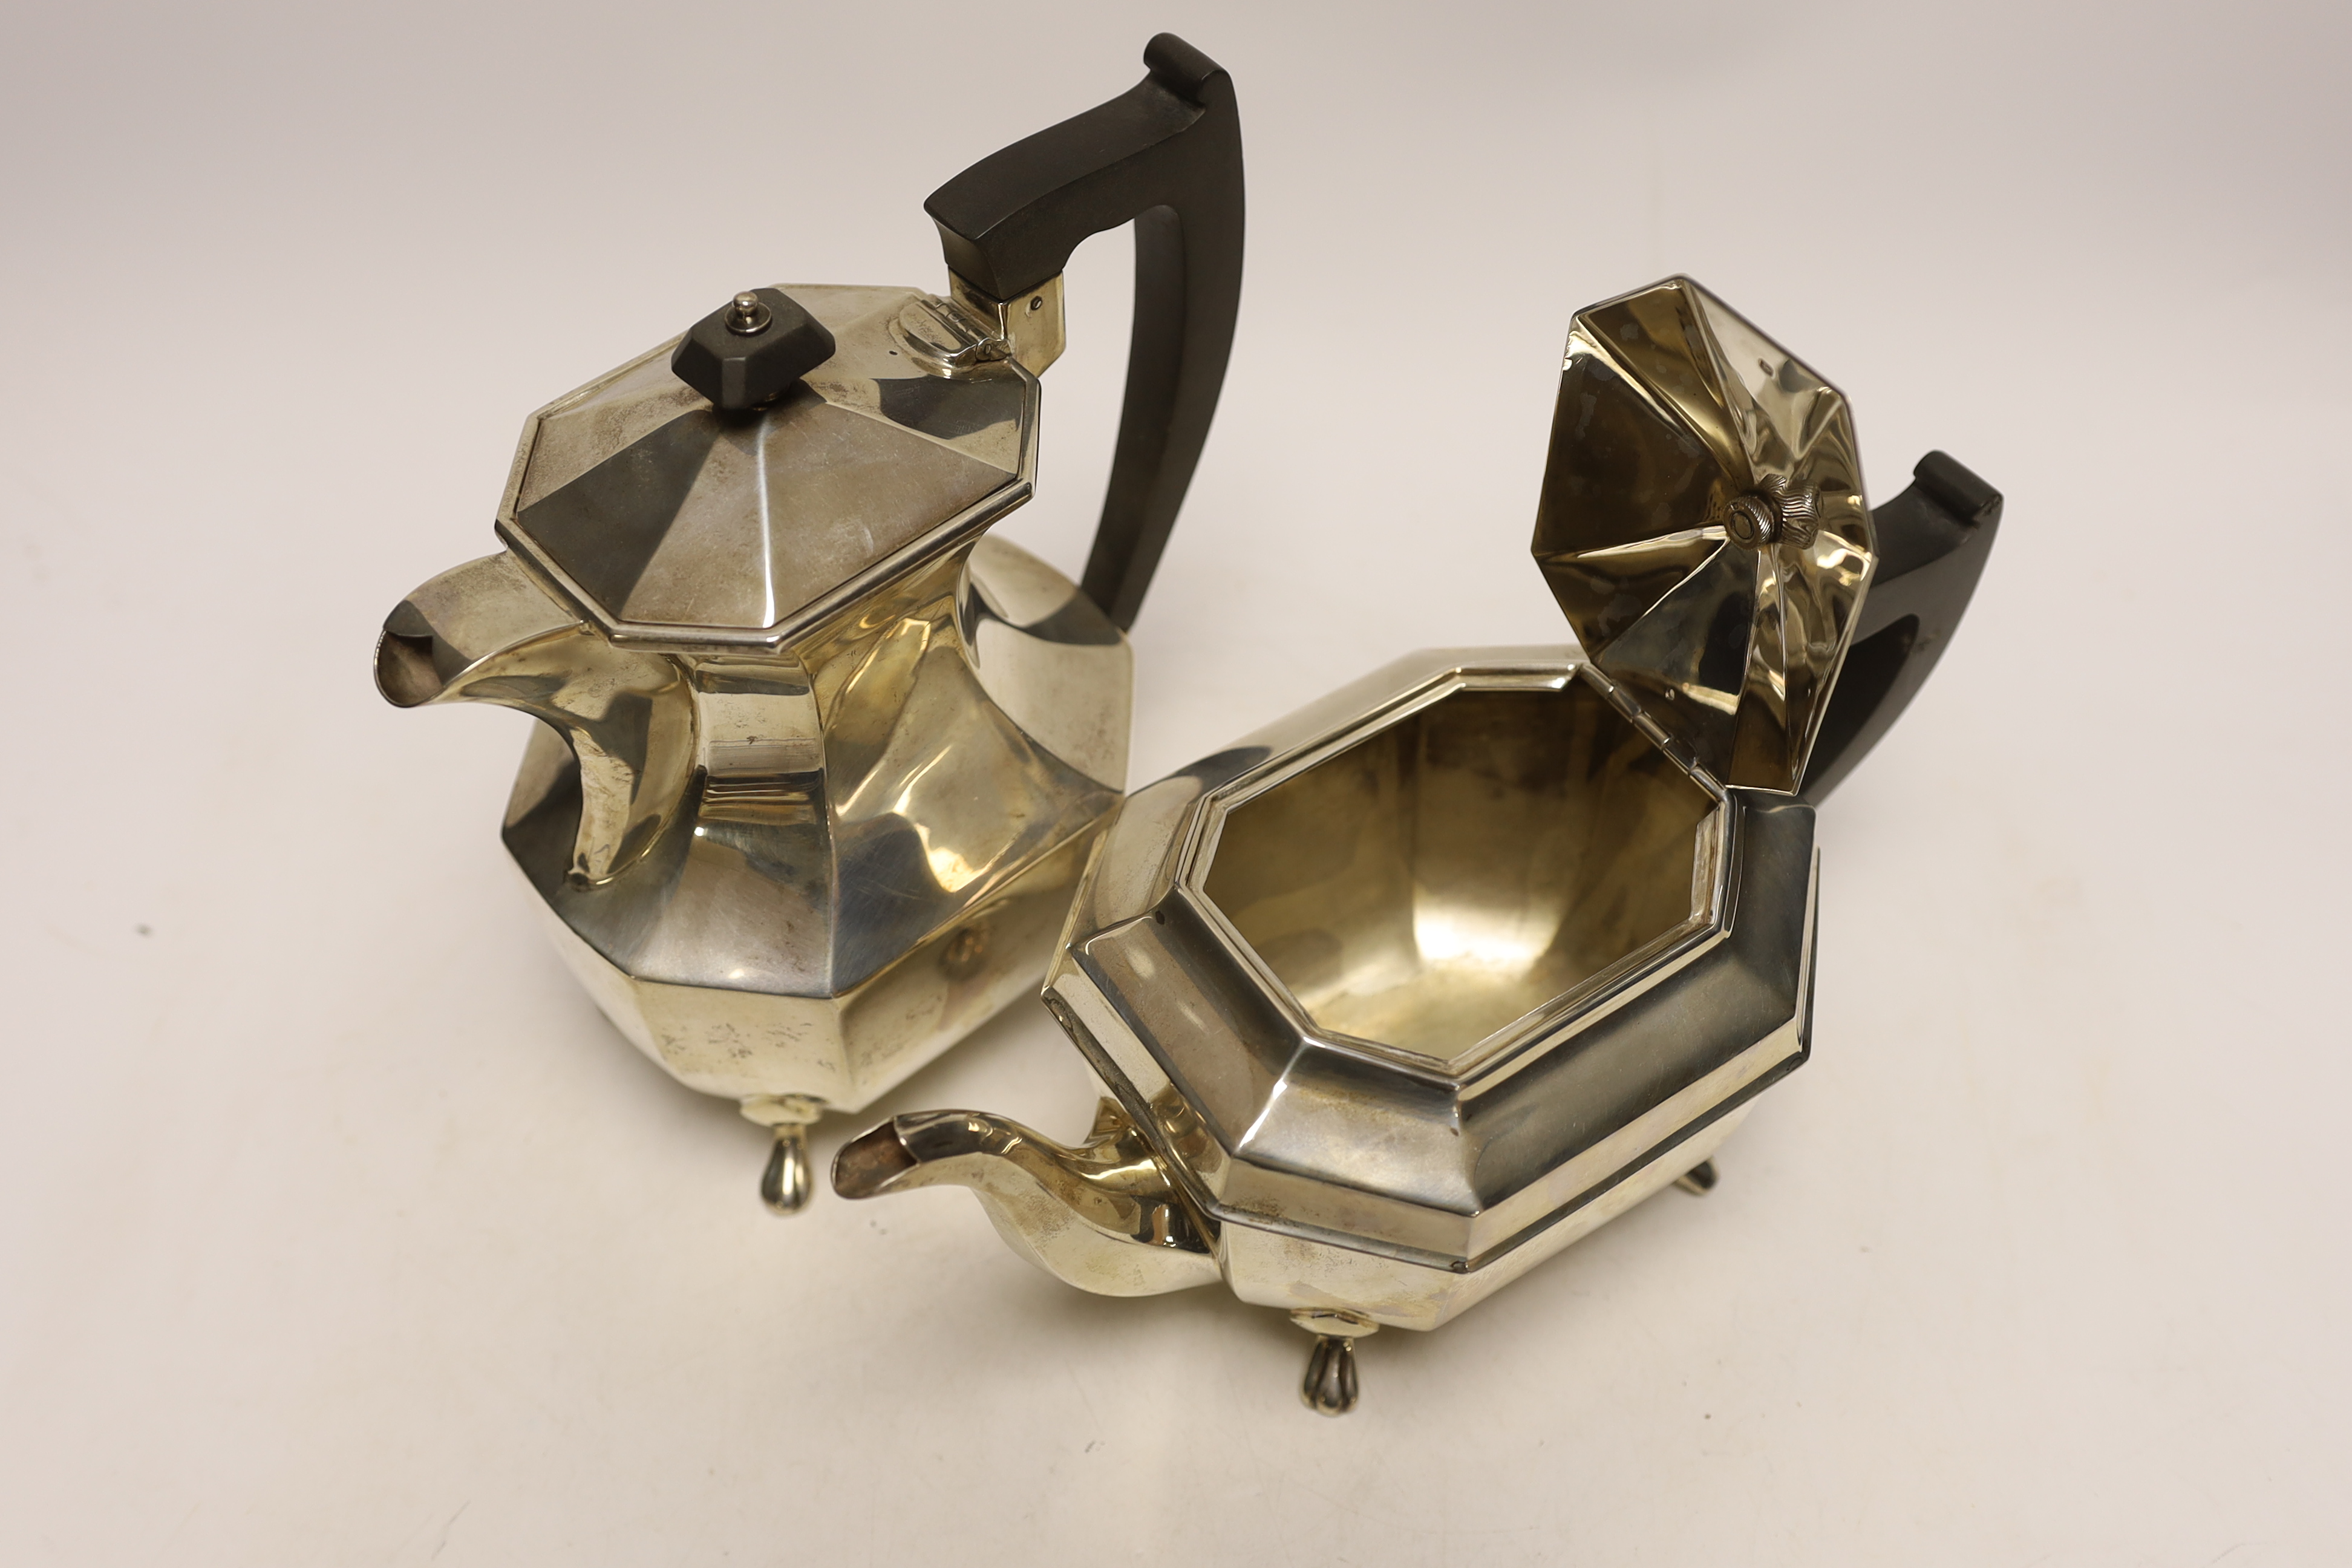 A George VI silver teapot and matching hot water pot by Viners Ltd, Sheffield, 1947/48, gross weight 38.5oz.